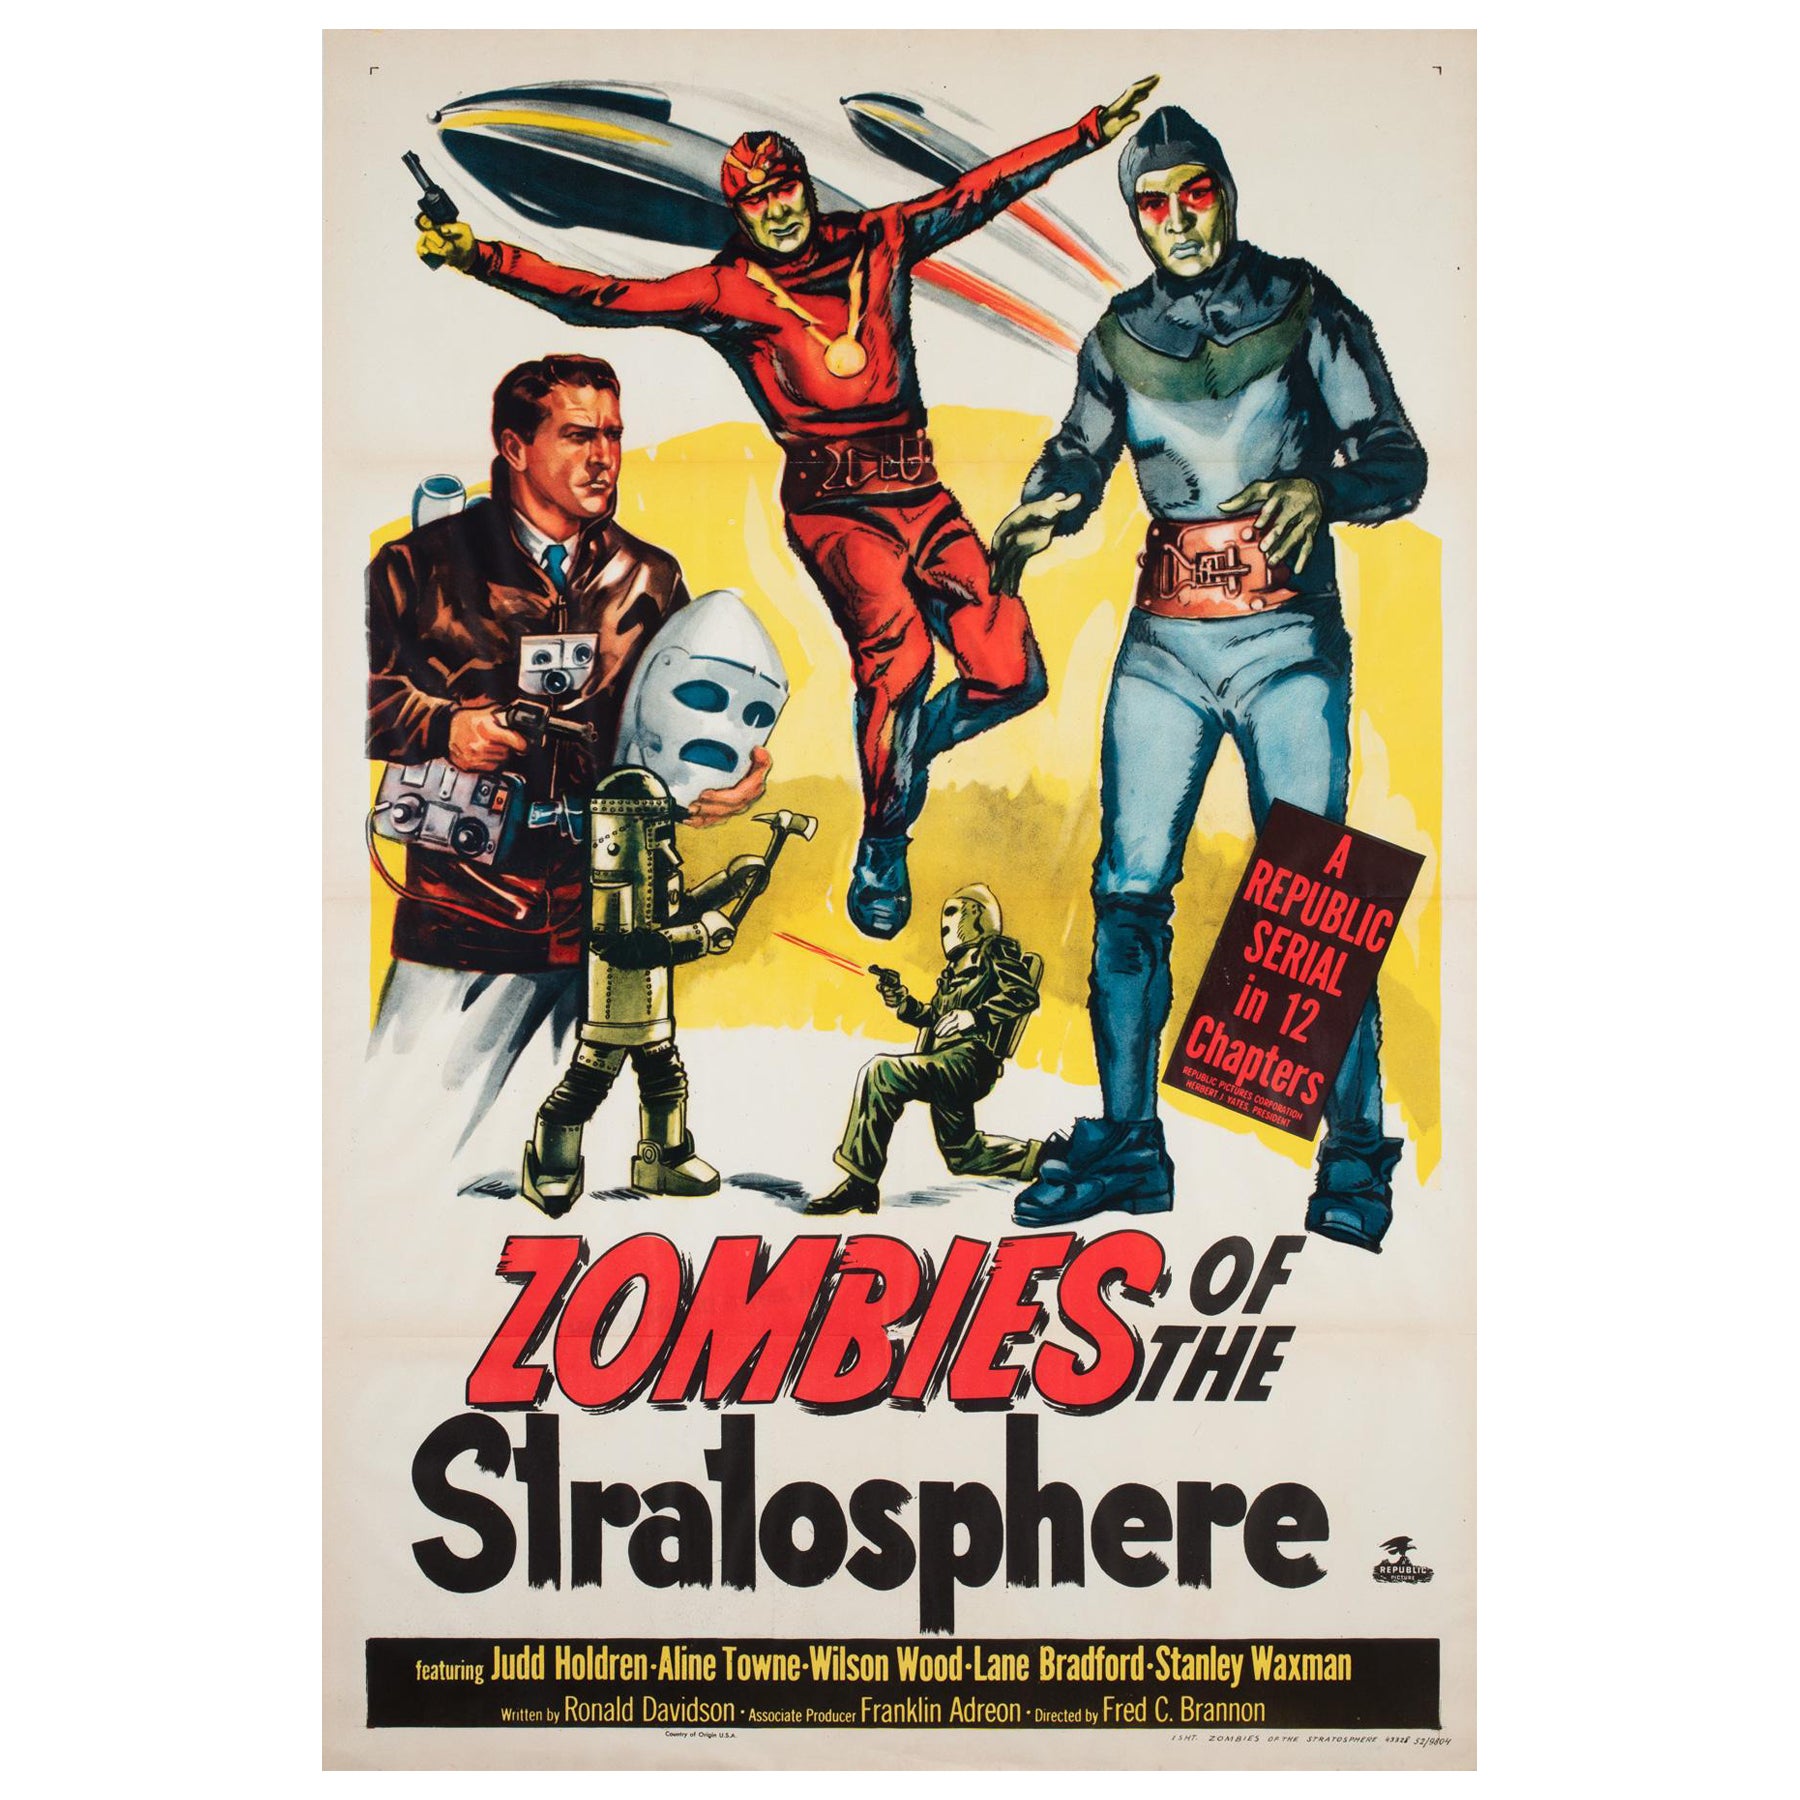 "Zombies of the Stratosphere" US Film Movie Poster, 1952